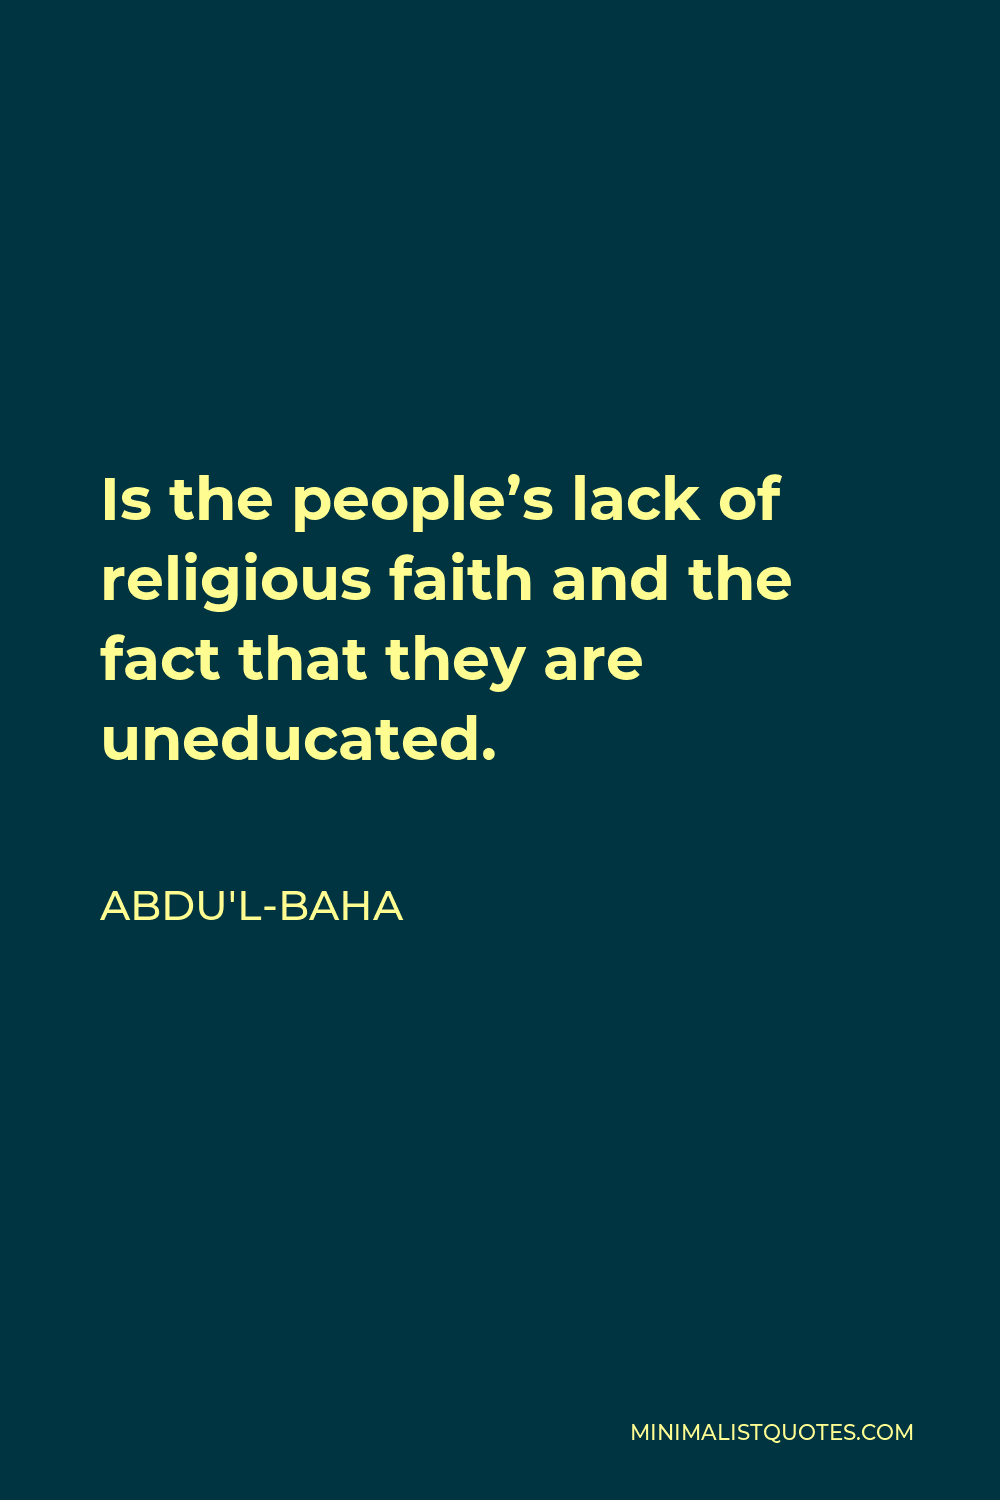 Abdu'l-Baha Quote - Is the people’s lack of religious faith and the fact that they are uneducated.